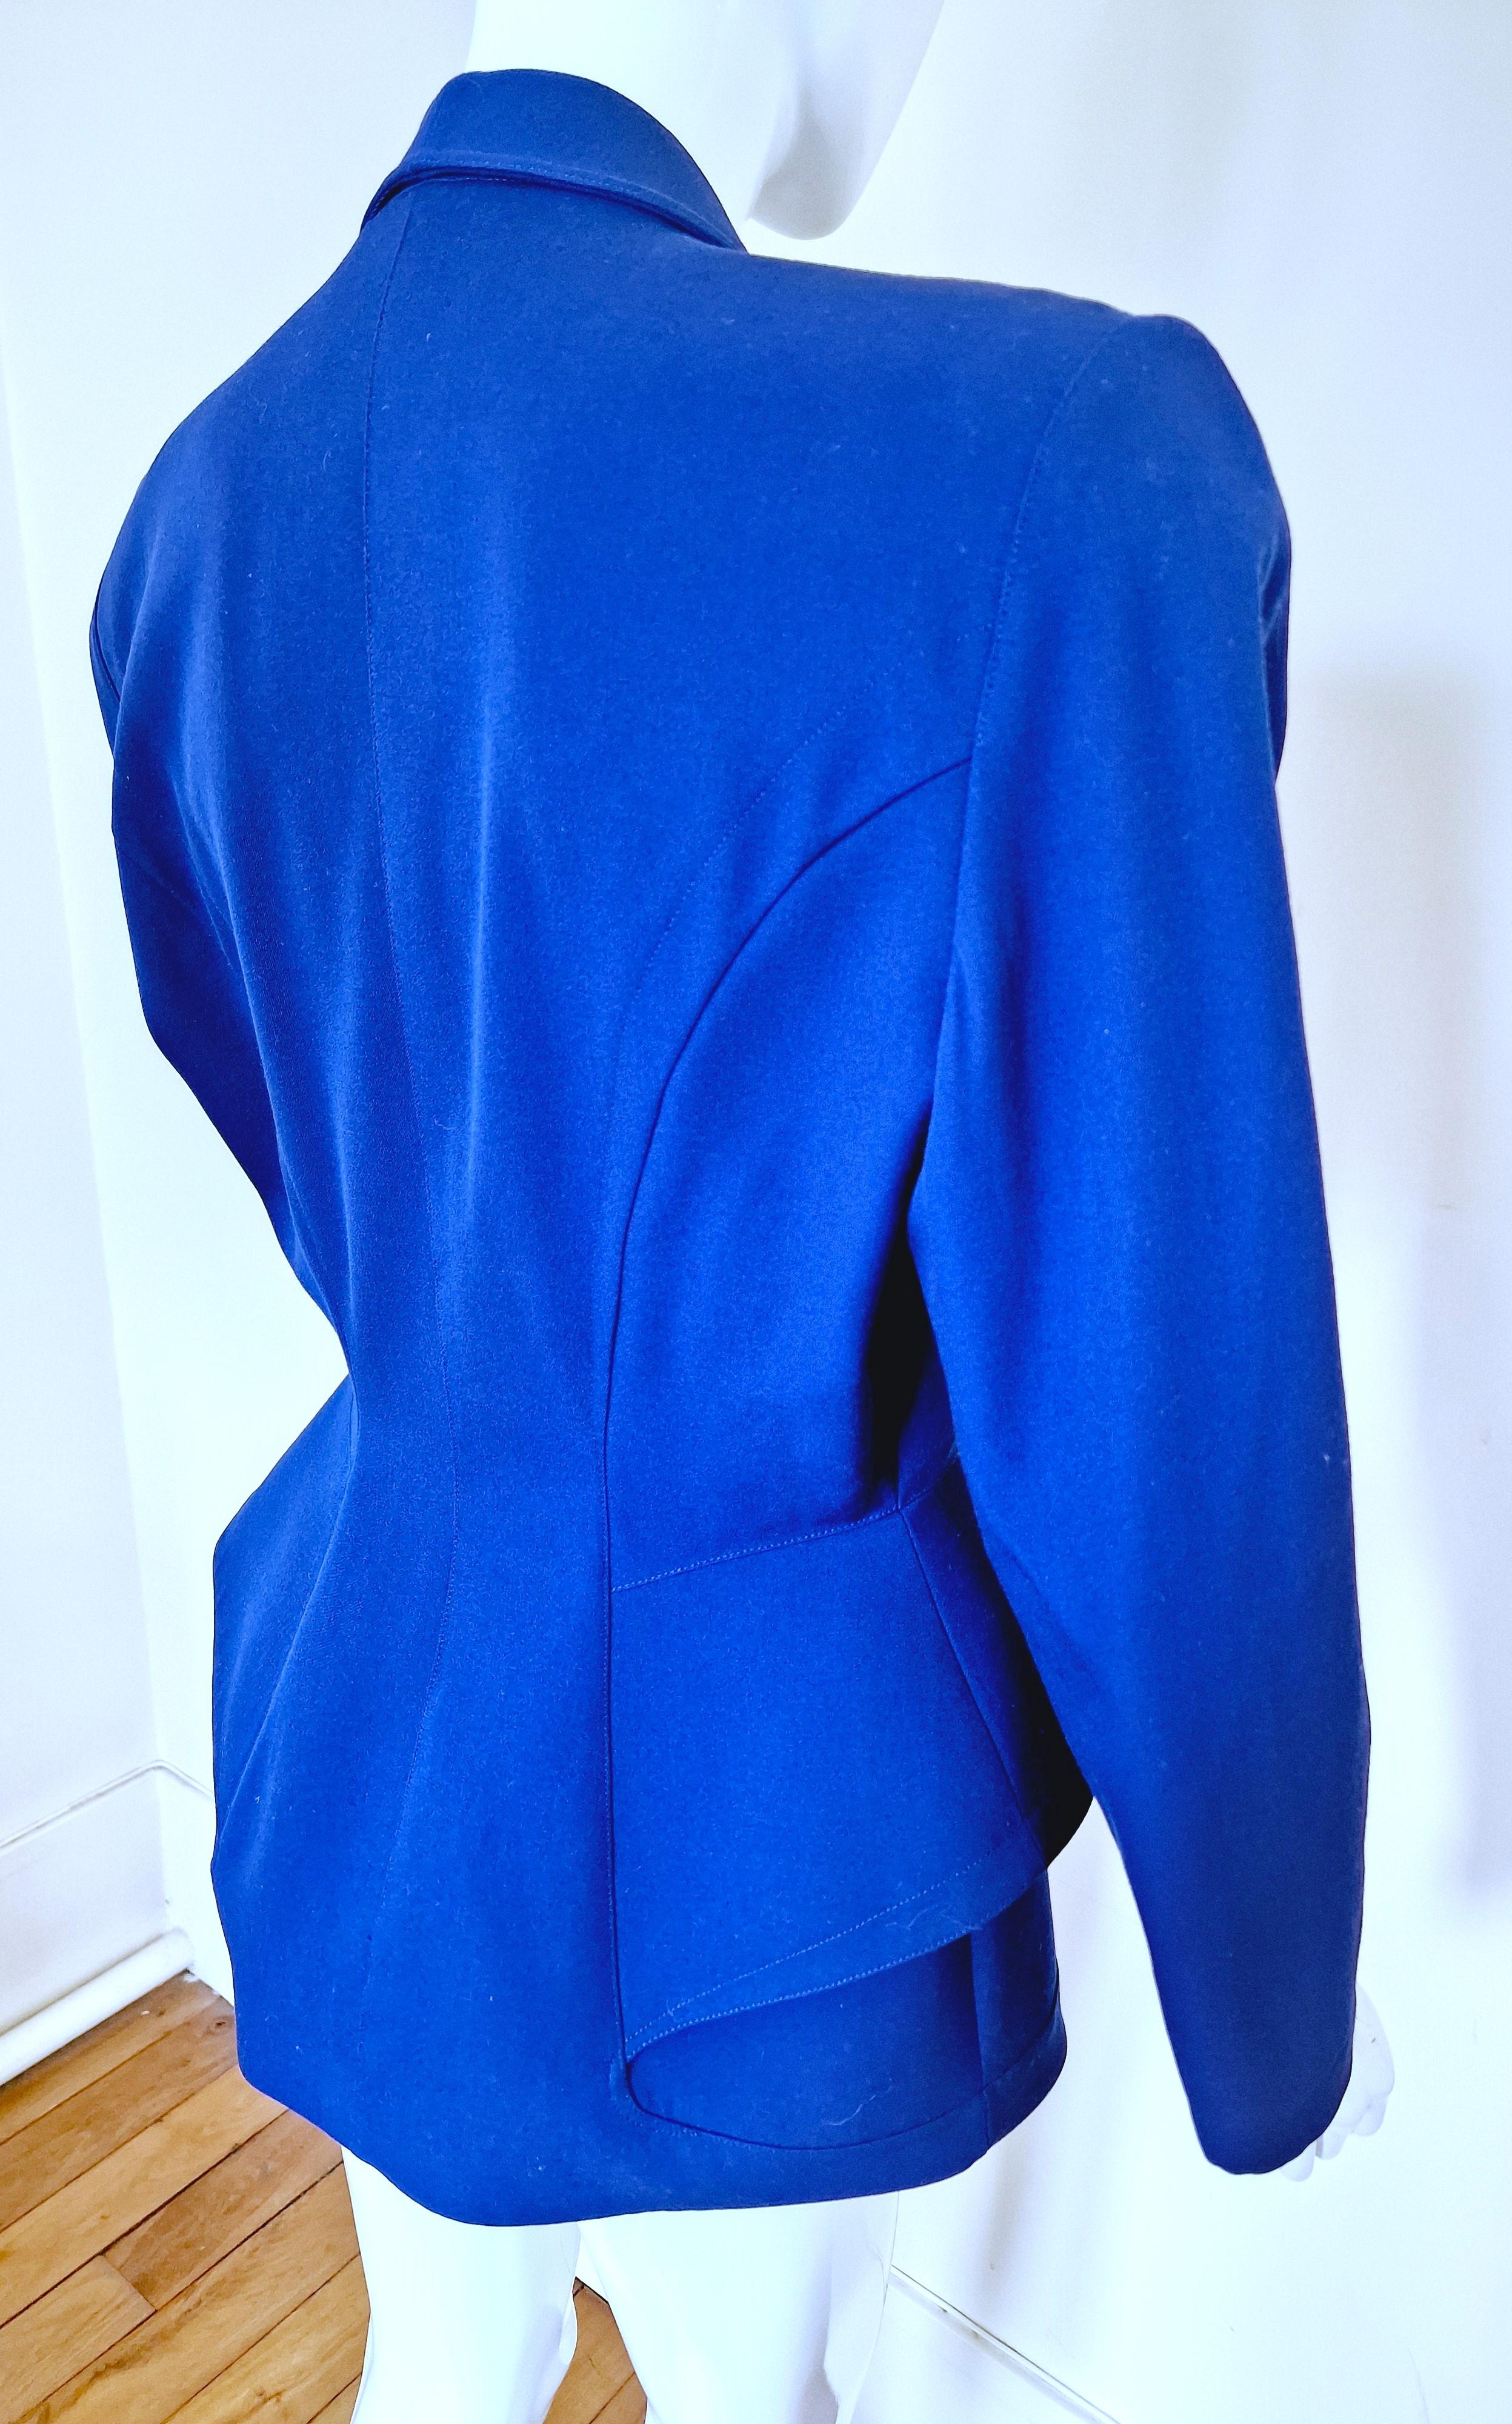 Thierry Mugler Vampire Blue Couture Chain Metal Vintage Large Blazer Jacket For Sale 7